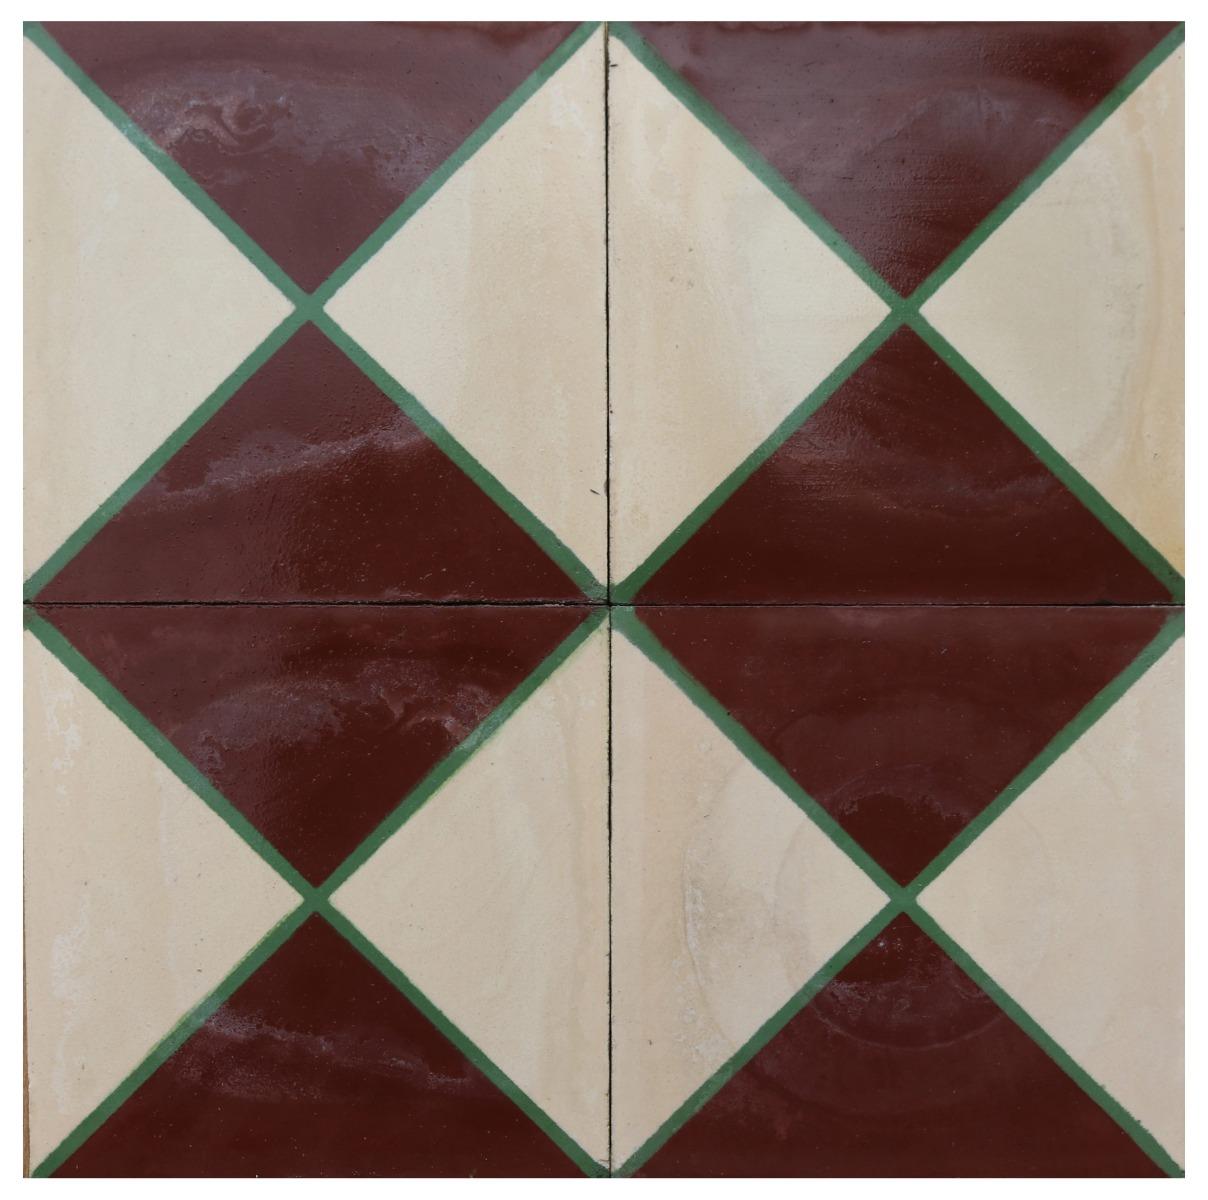 A batch of 121 reclaimed encaustic cement floor tiles. These tiles will cover 4.8 m2 or 52 sq. ft. They are suitable for use on floors or walls.

Small chips associated with transport and storage. Unused. Good overall condition. Small chips,